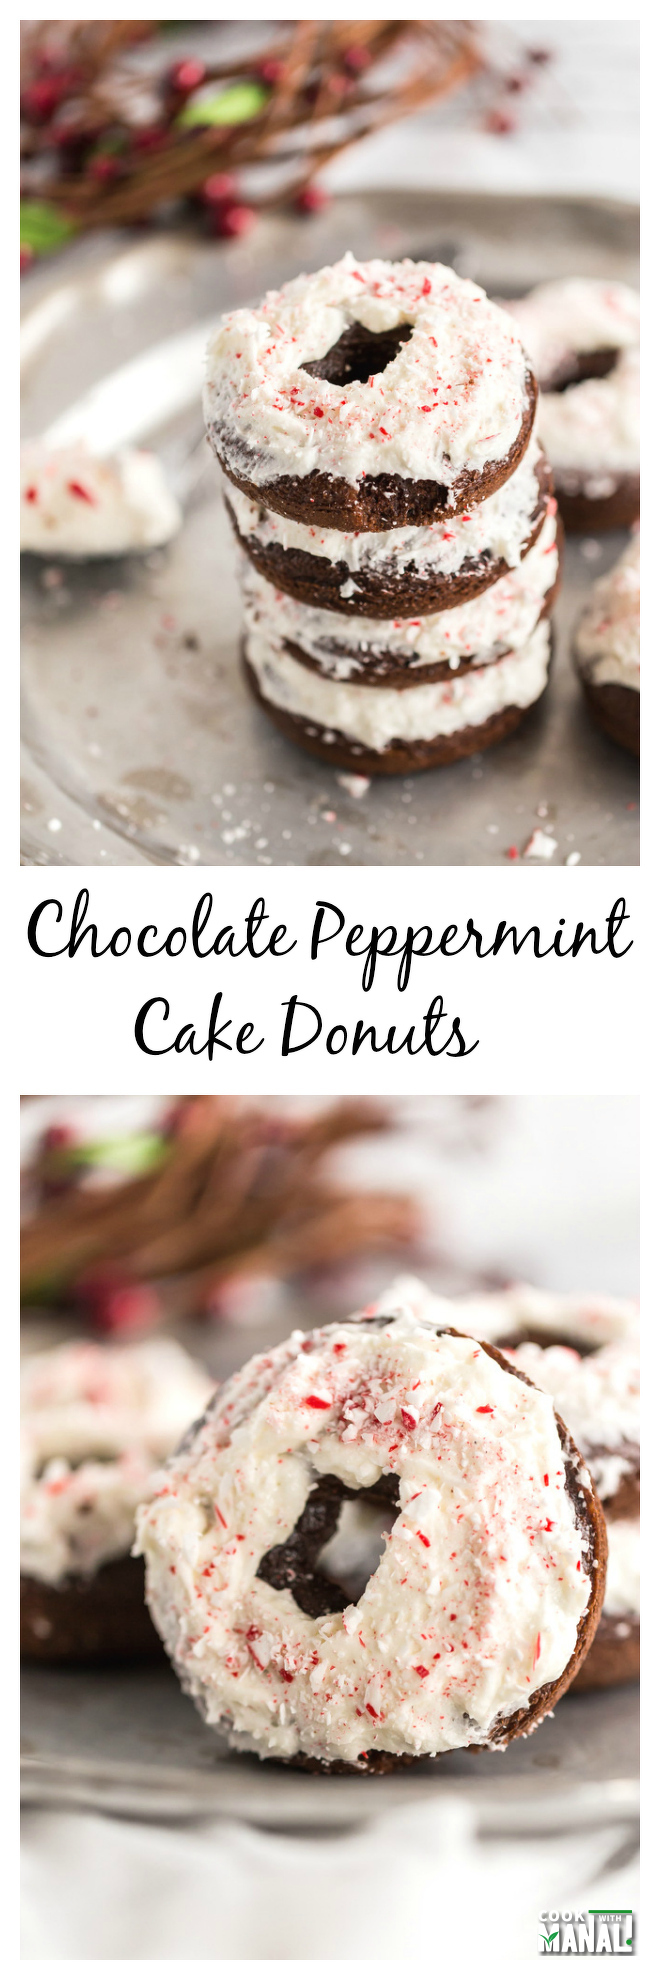 Chocolate Peppermint Cake Donuts Collage